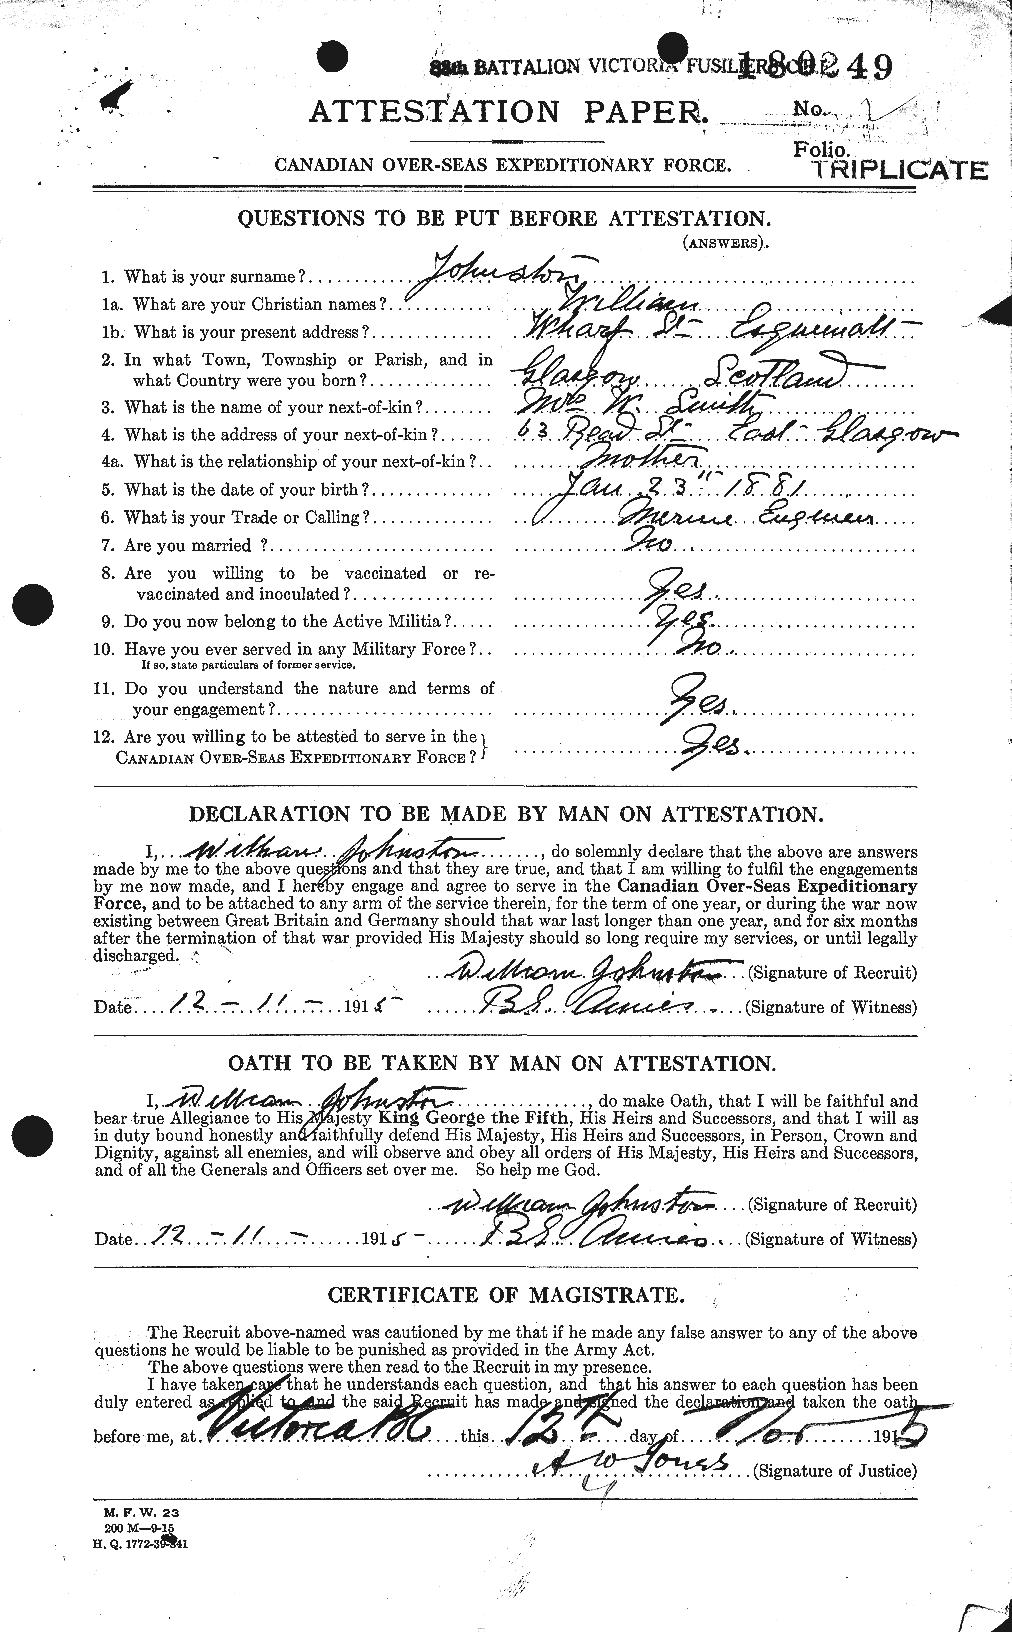 Personnel Records of the First World War - CEF 427289a